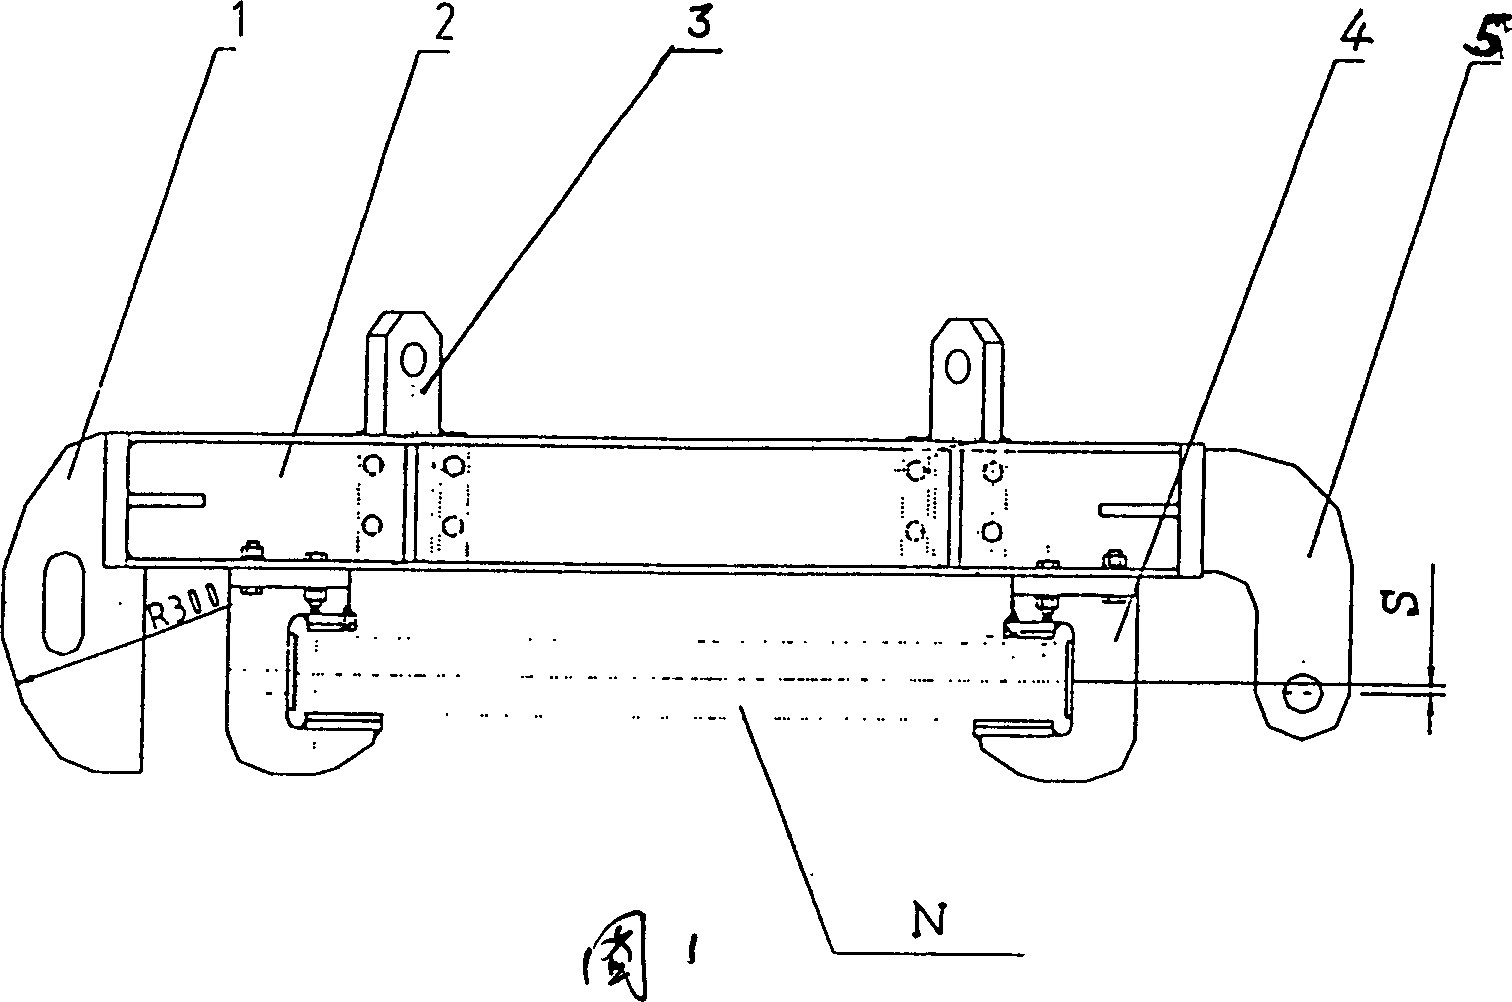 Composite sling for hot press plate translation lifting and turn over and its use method